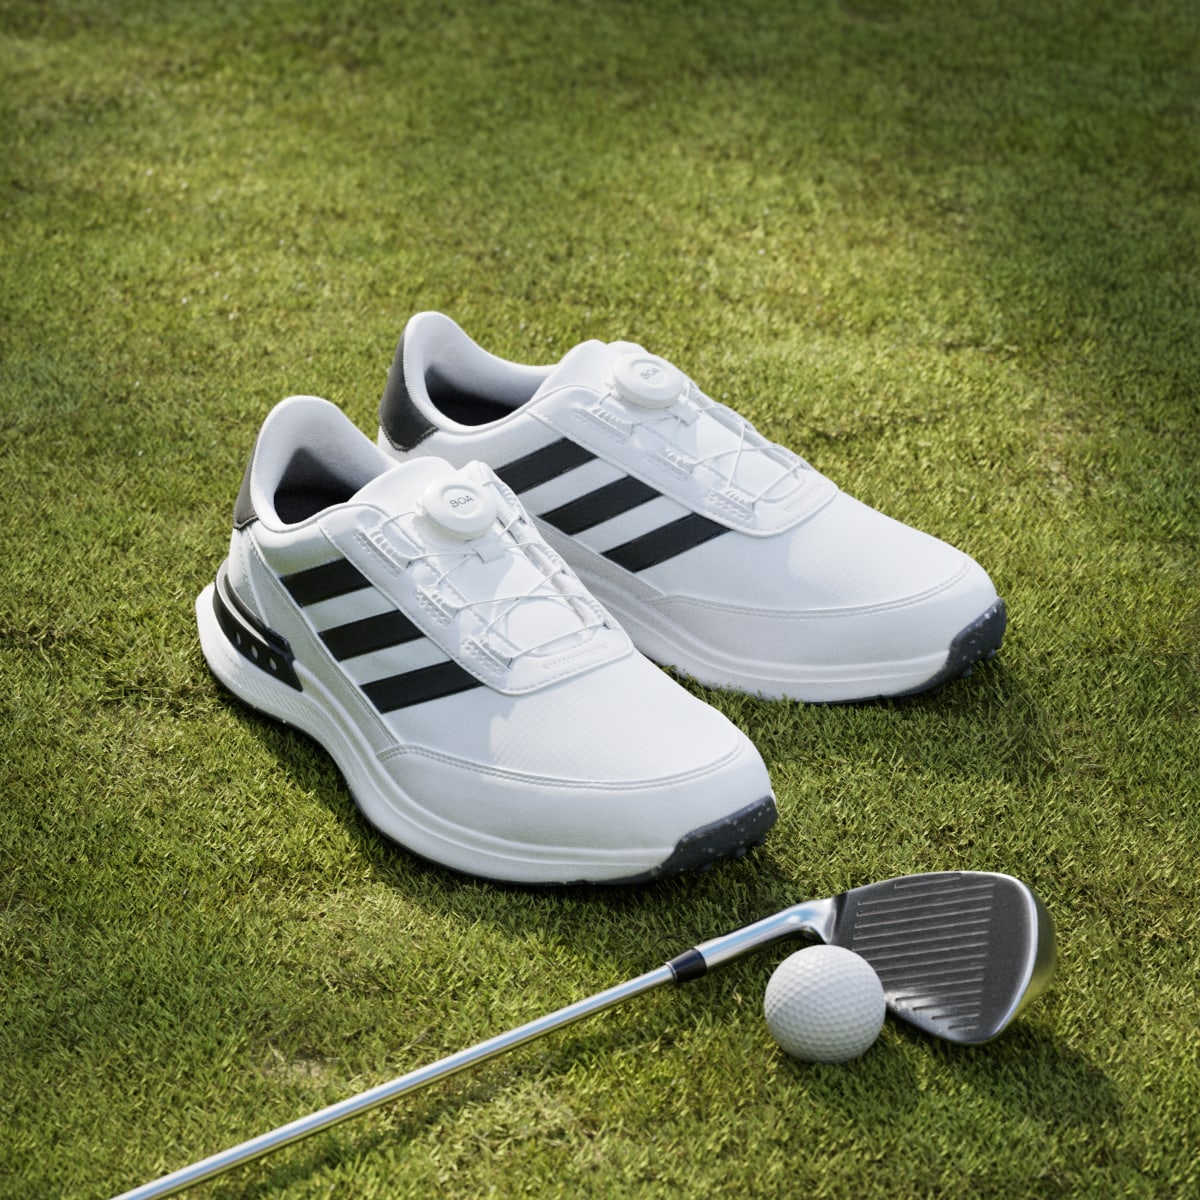 Adidas S2G Spikeless BOA 24 Wide Golf Shoes. 4